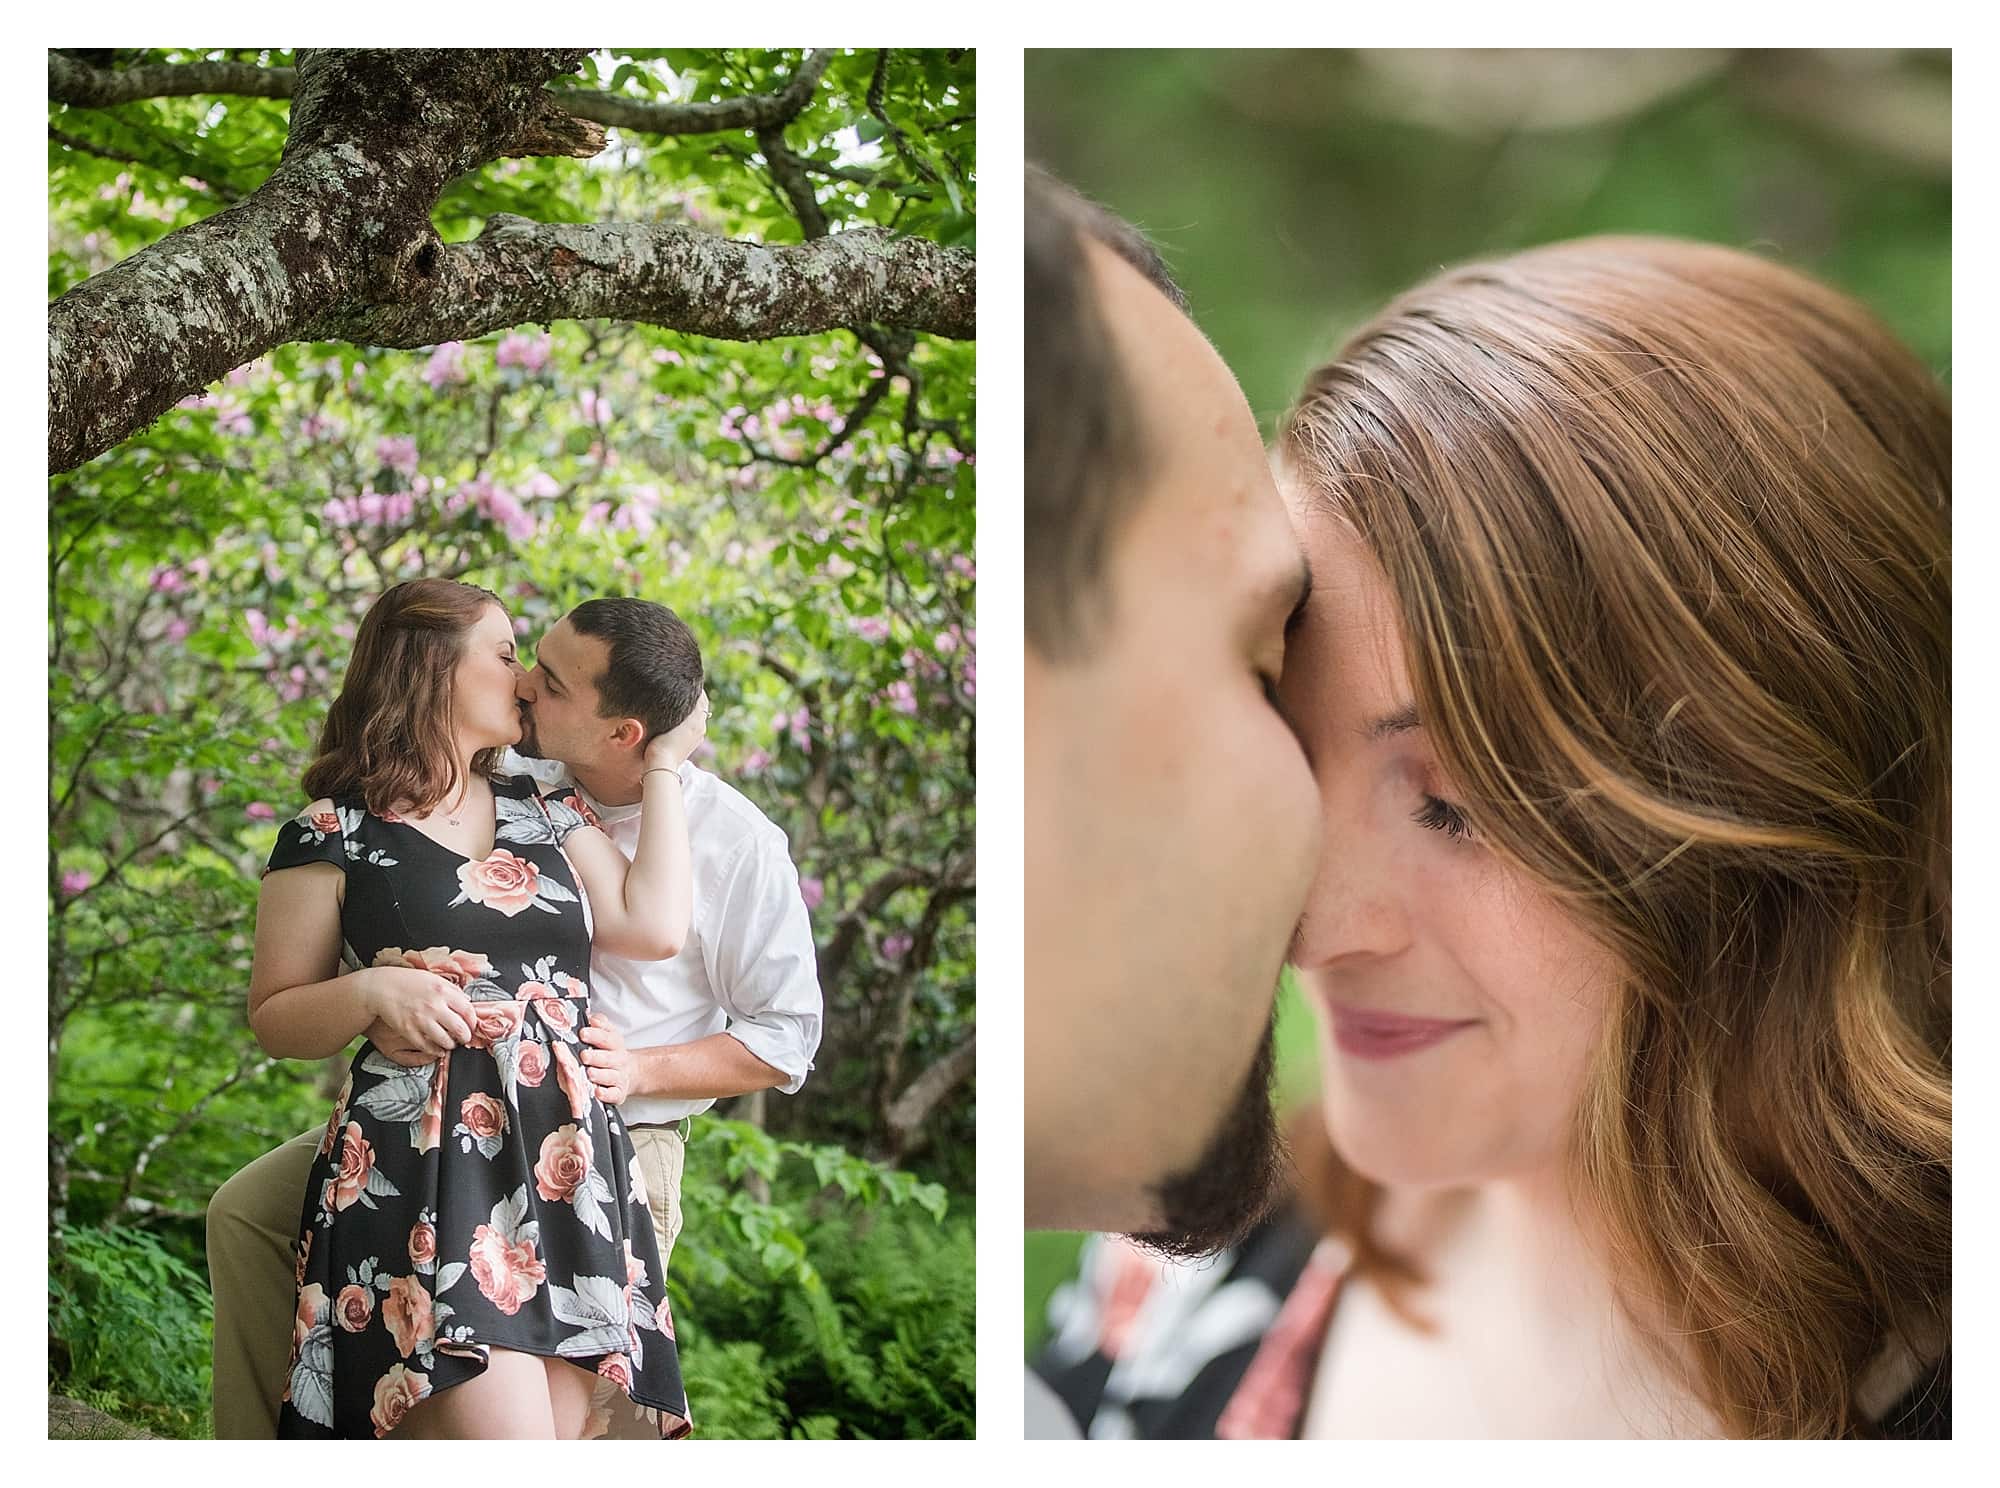 Couple kissing with Rhododendron behind them.